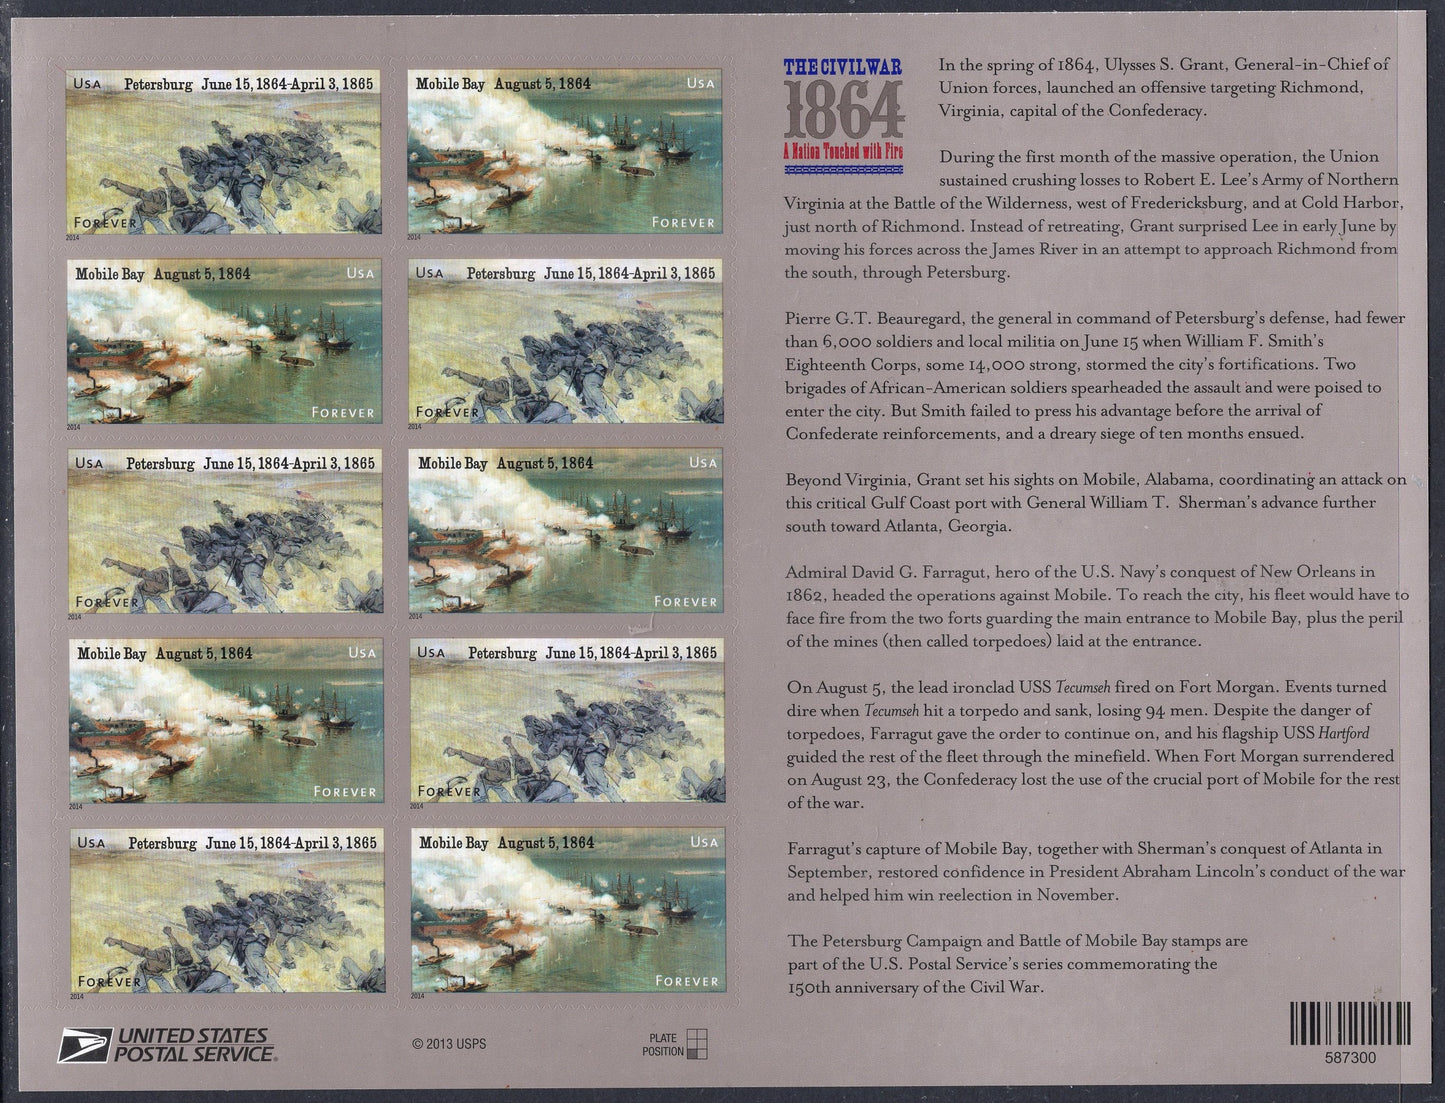 CIVIL WAR 1861-1865 COMPLETE Anniversary Collection of 5 Sheets of 12 Stamps - Mint Bright Fresh - s4522/4980 -